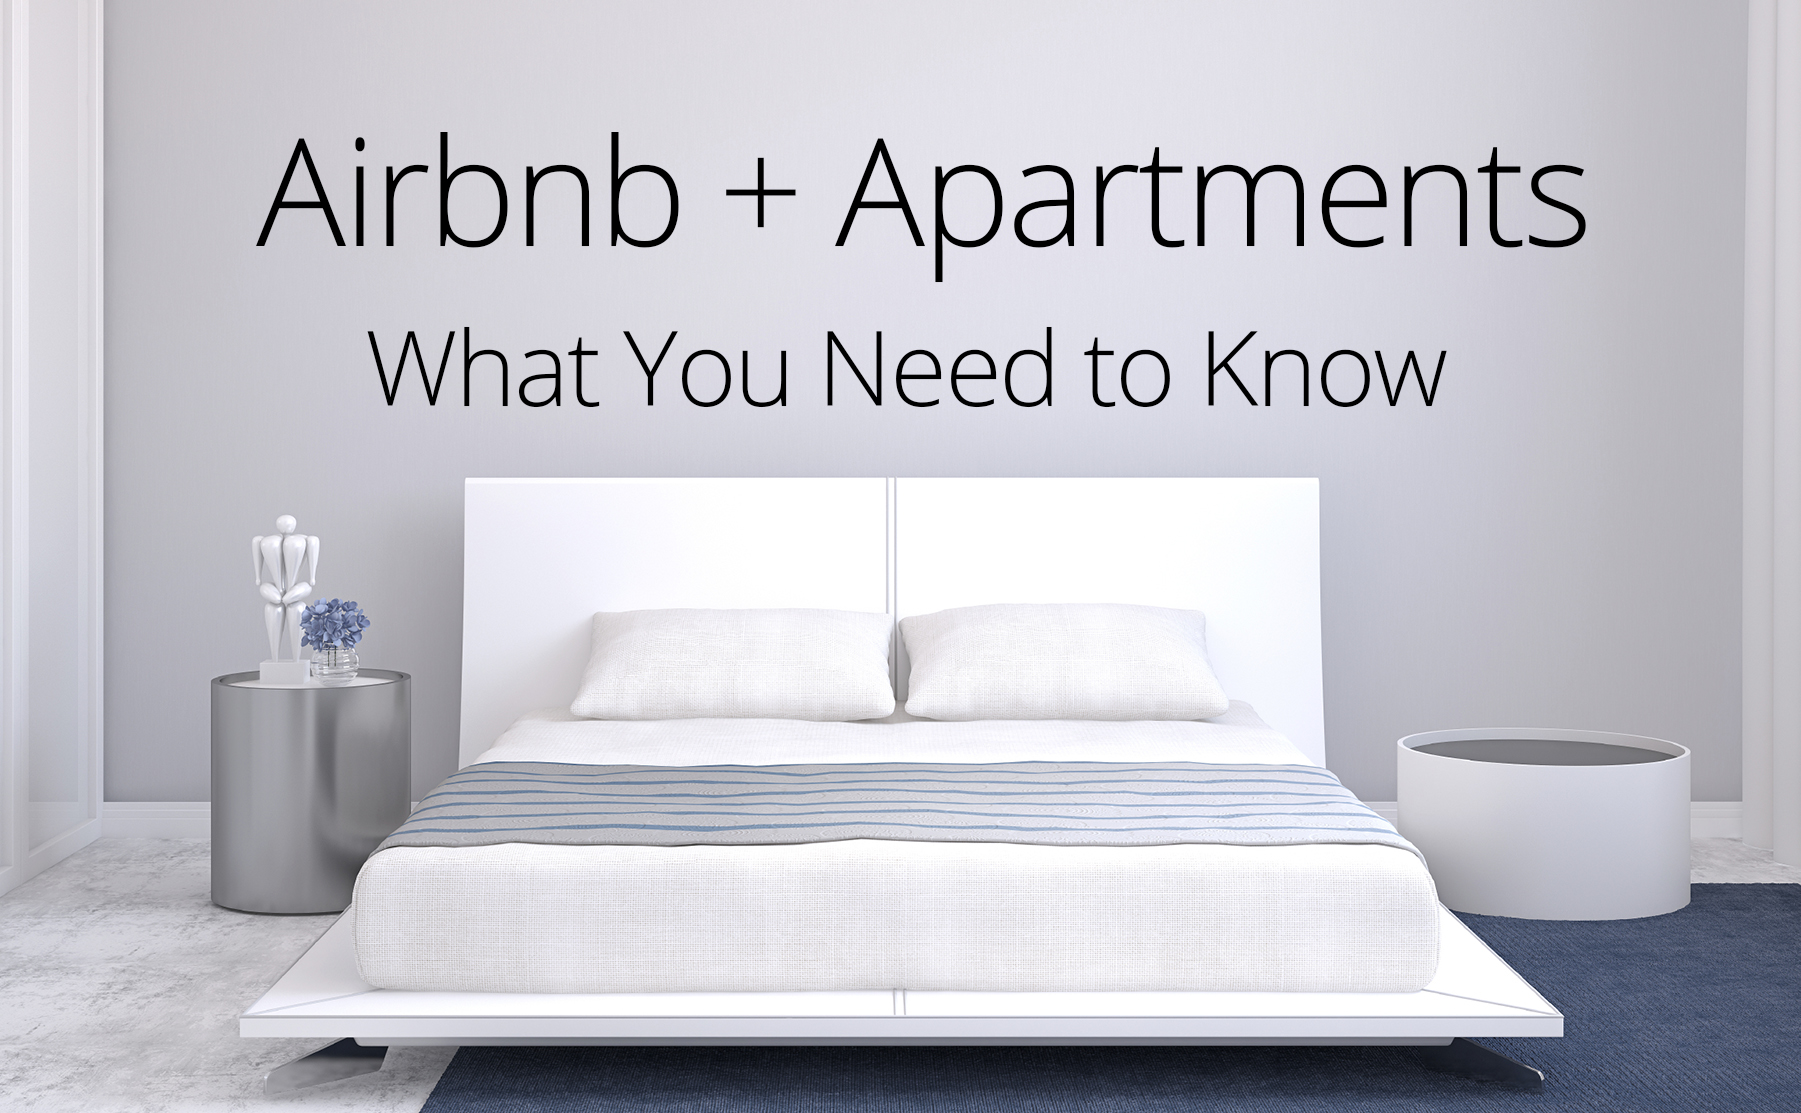 Airbnb + Apartments What You Need to Know